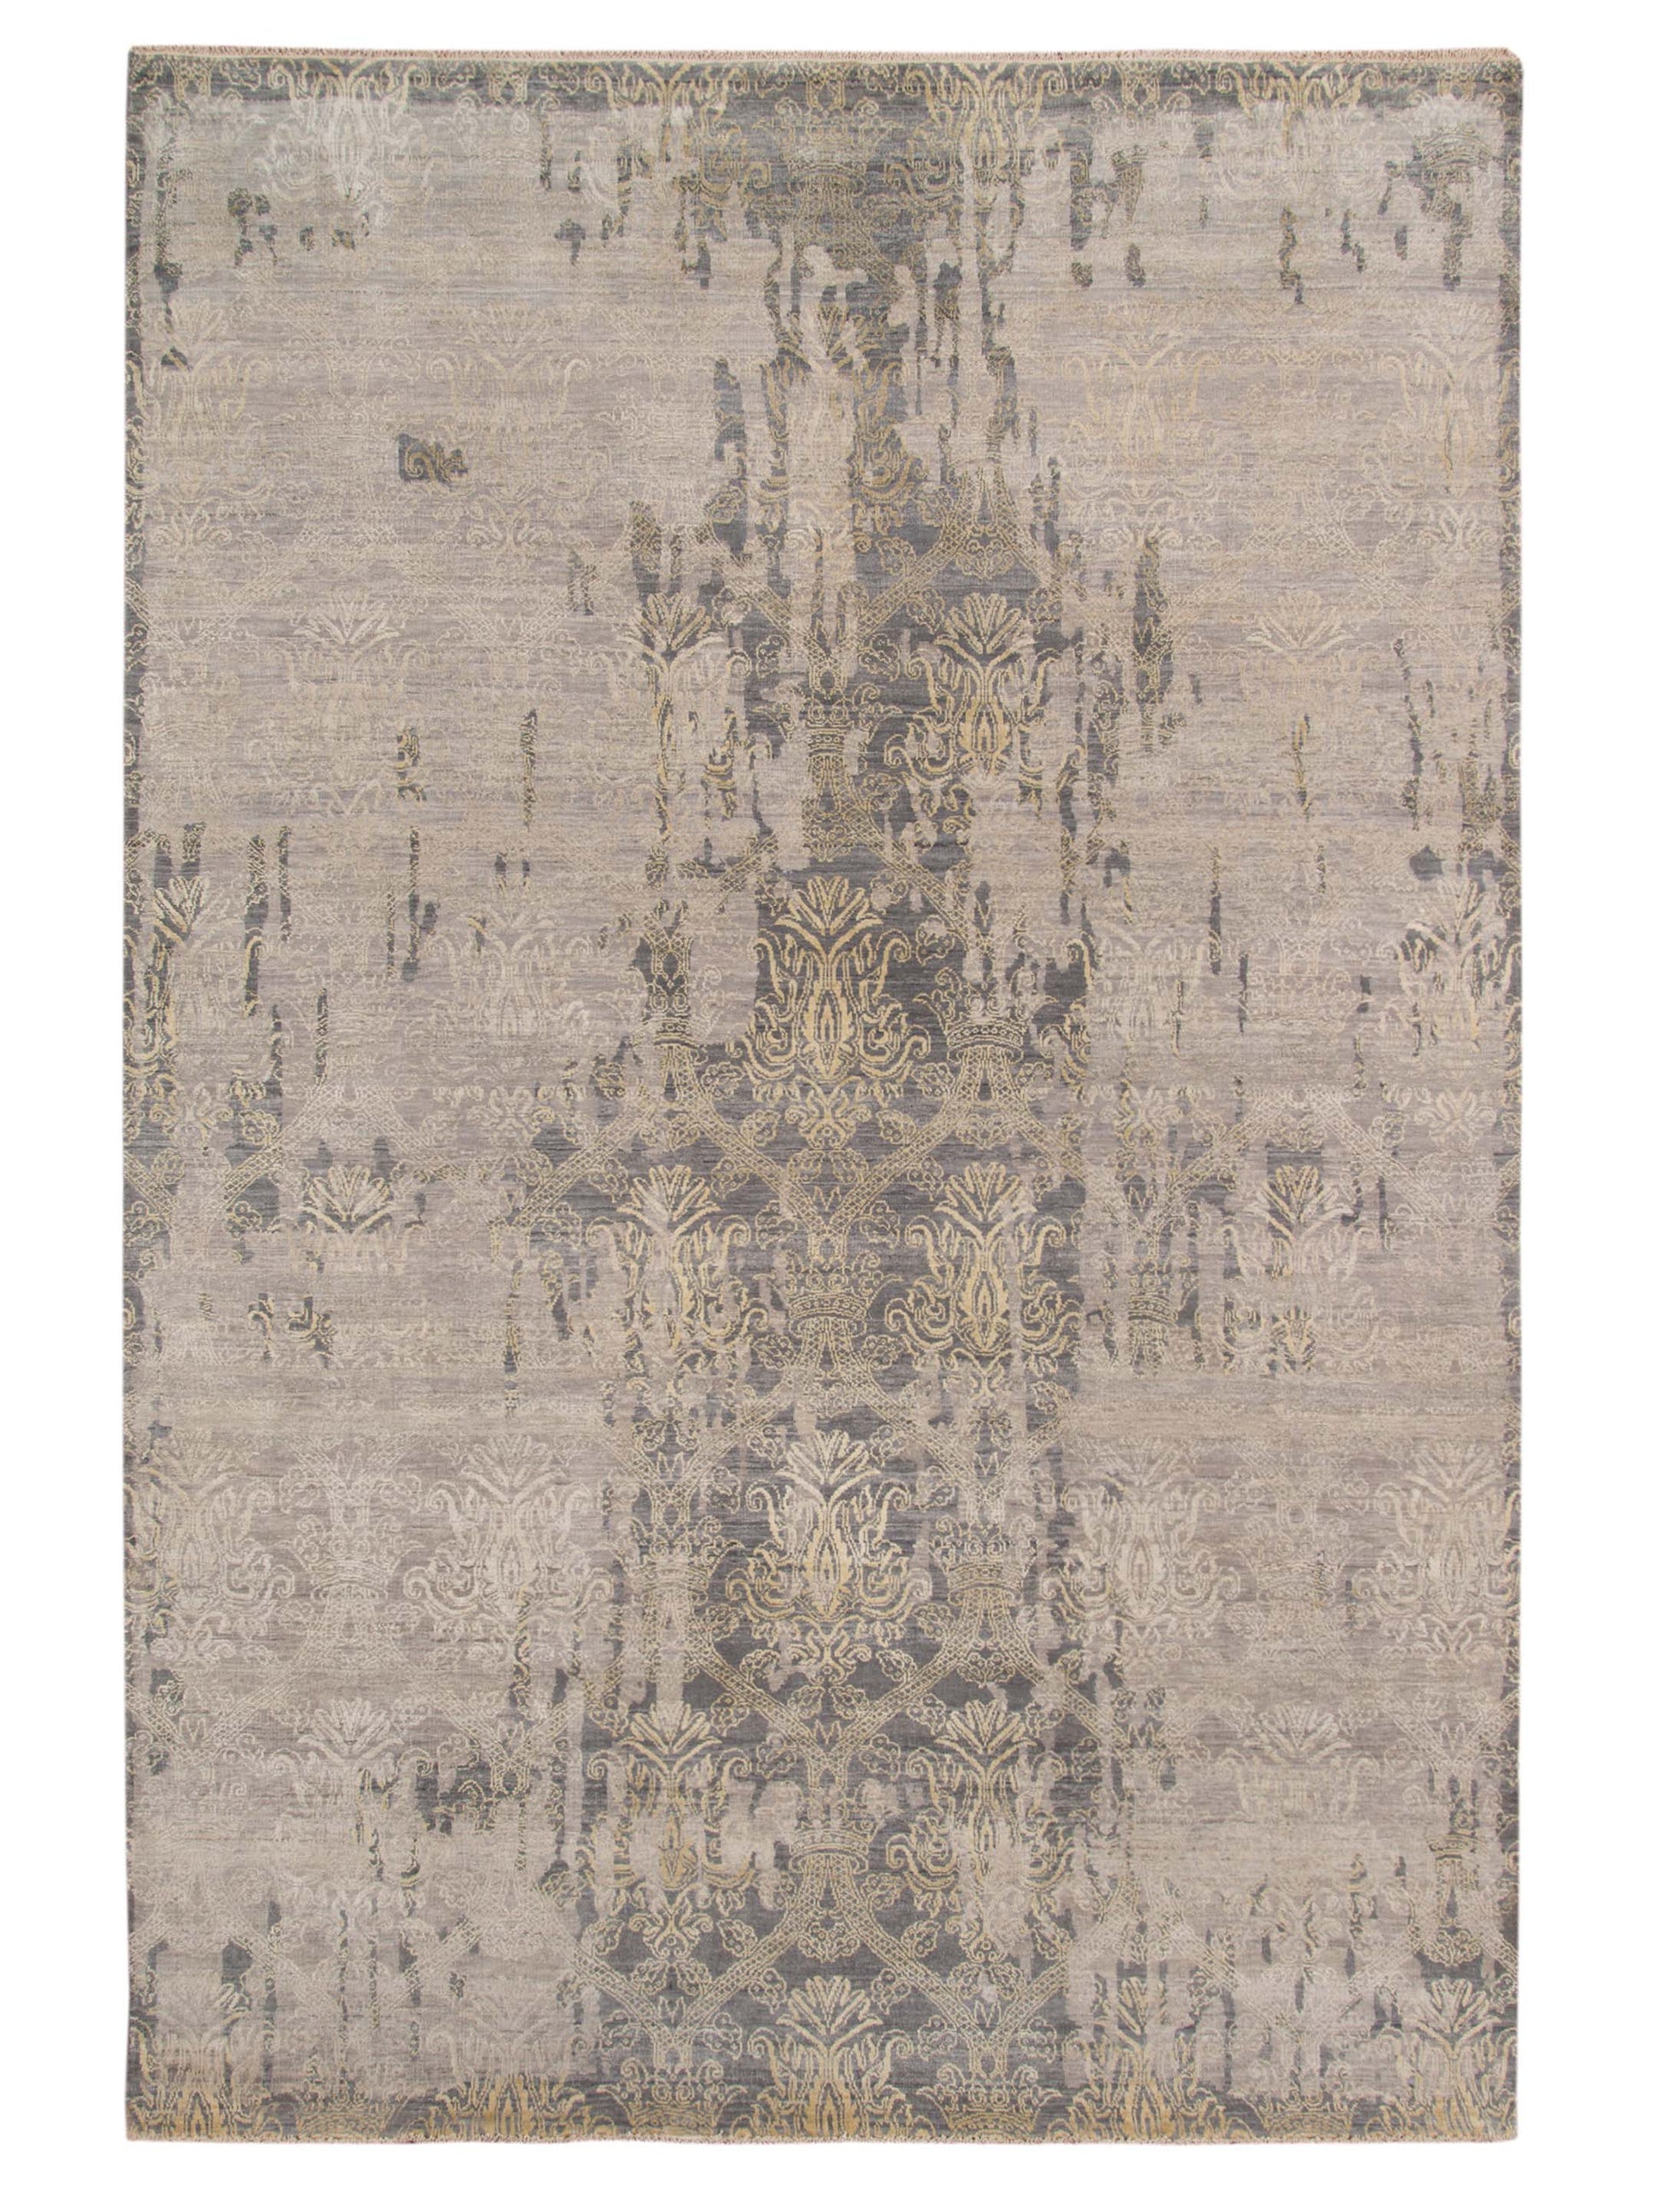 Limited PARKES PA-557 LIGHT GRAY Transitional Knotted Rug